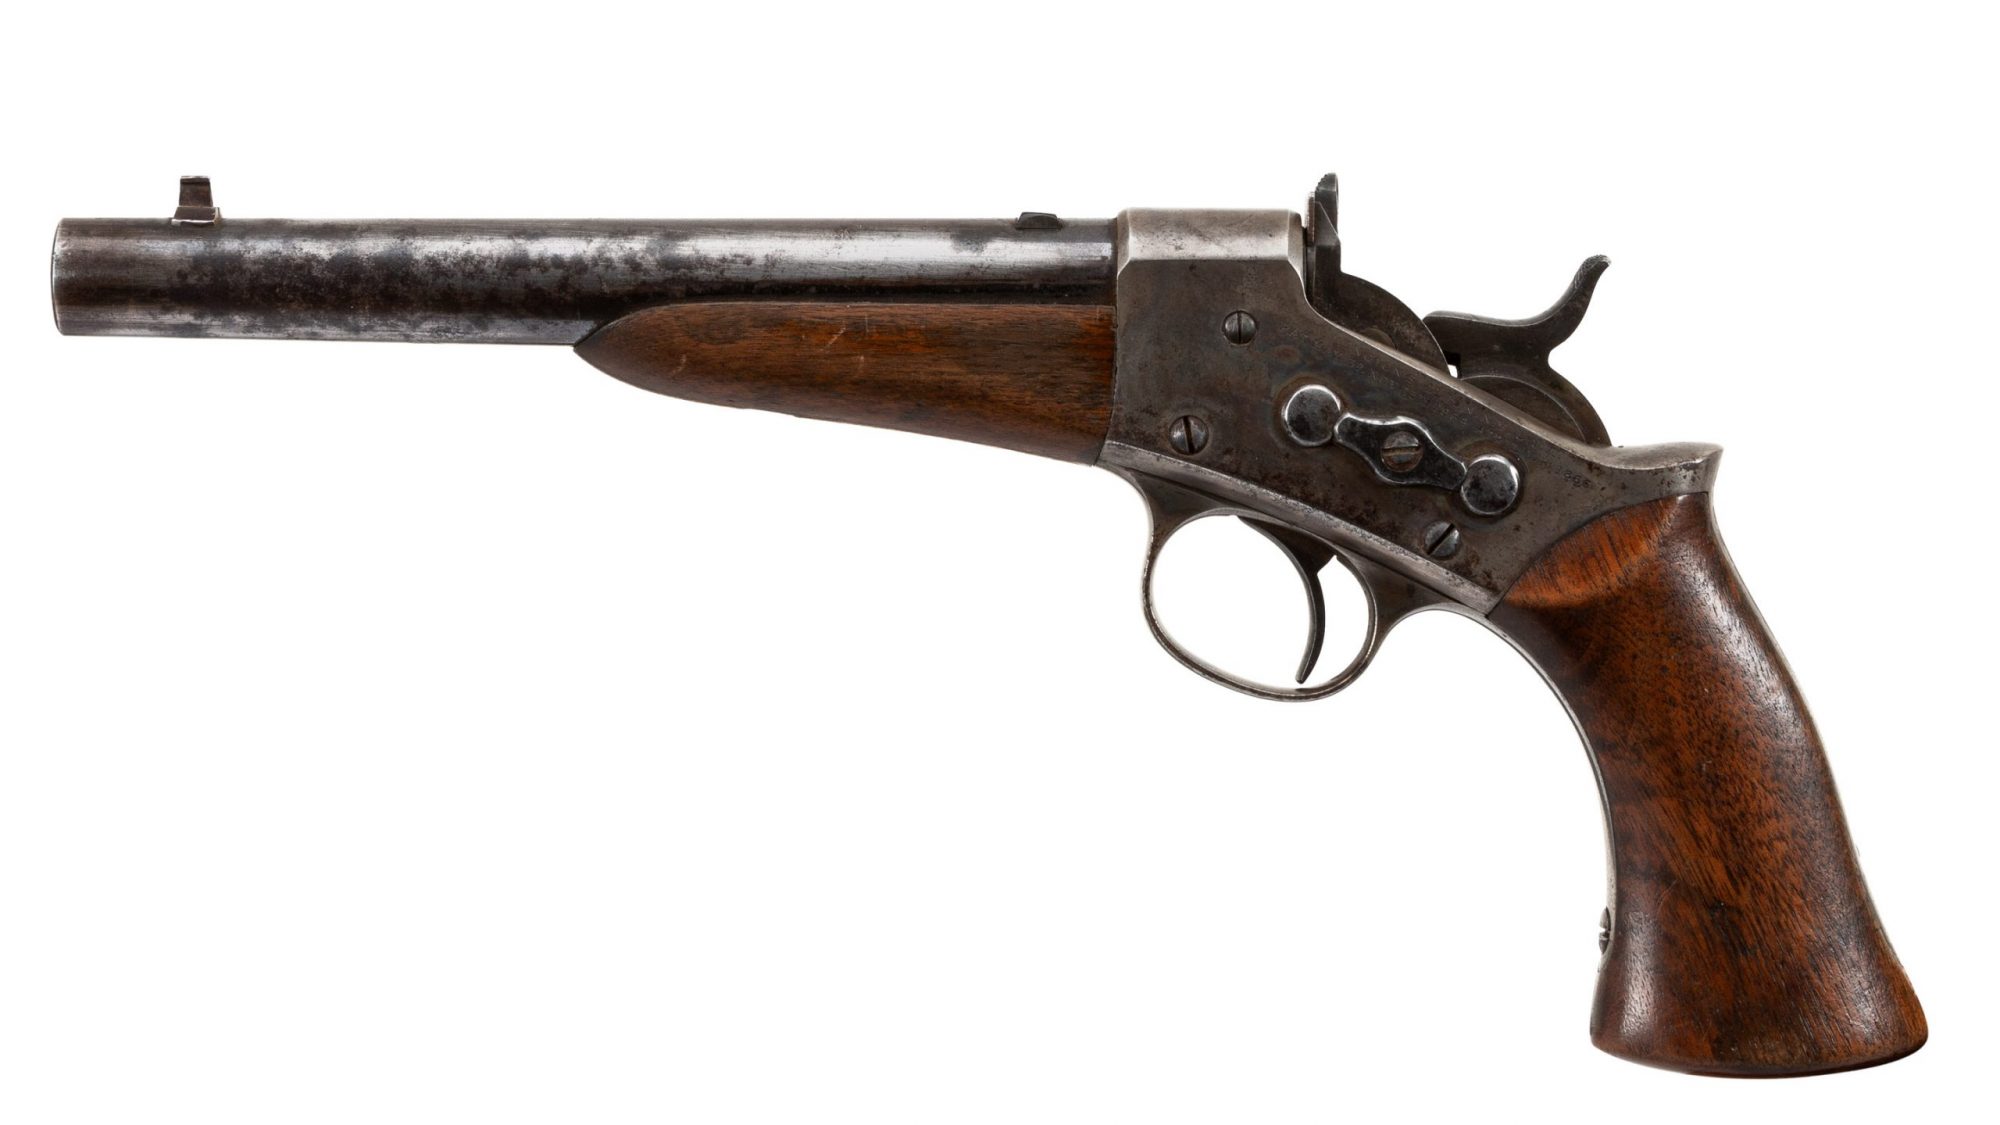 Photo of a pre-owned Remington Model 1871, for sale as-is through Turnbull Restoration of Bloomfield, NY